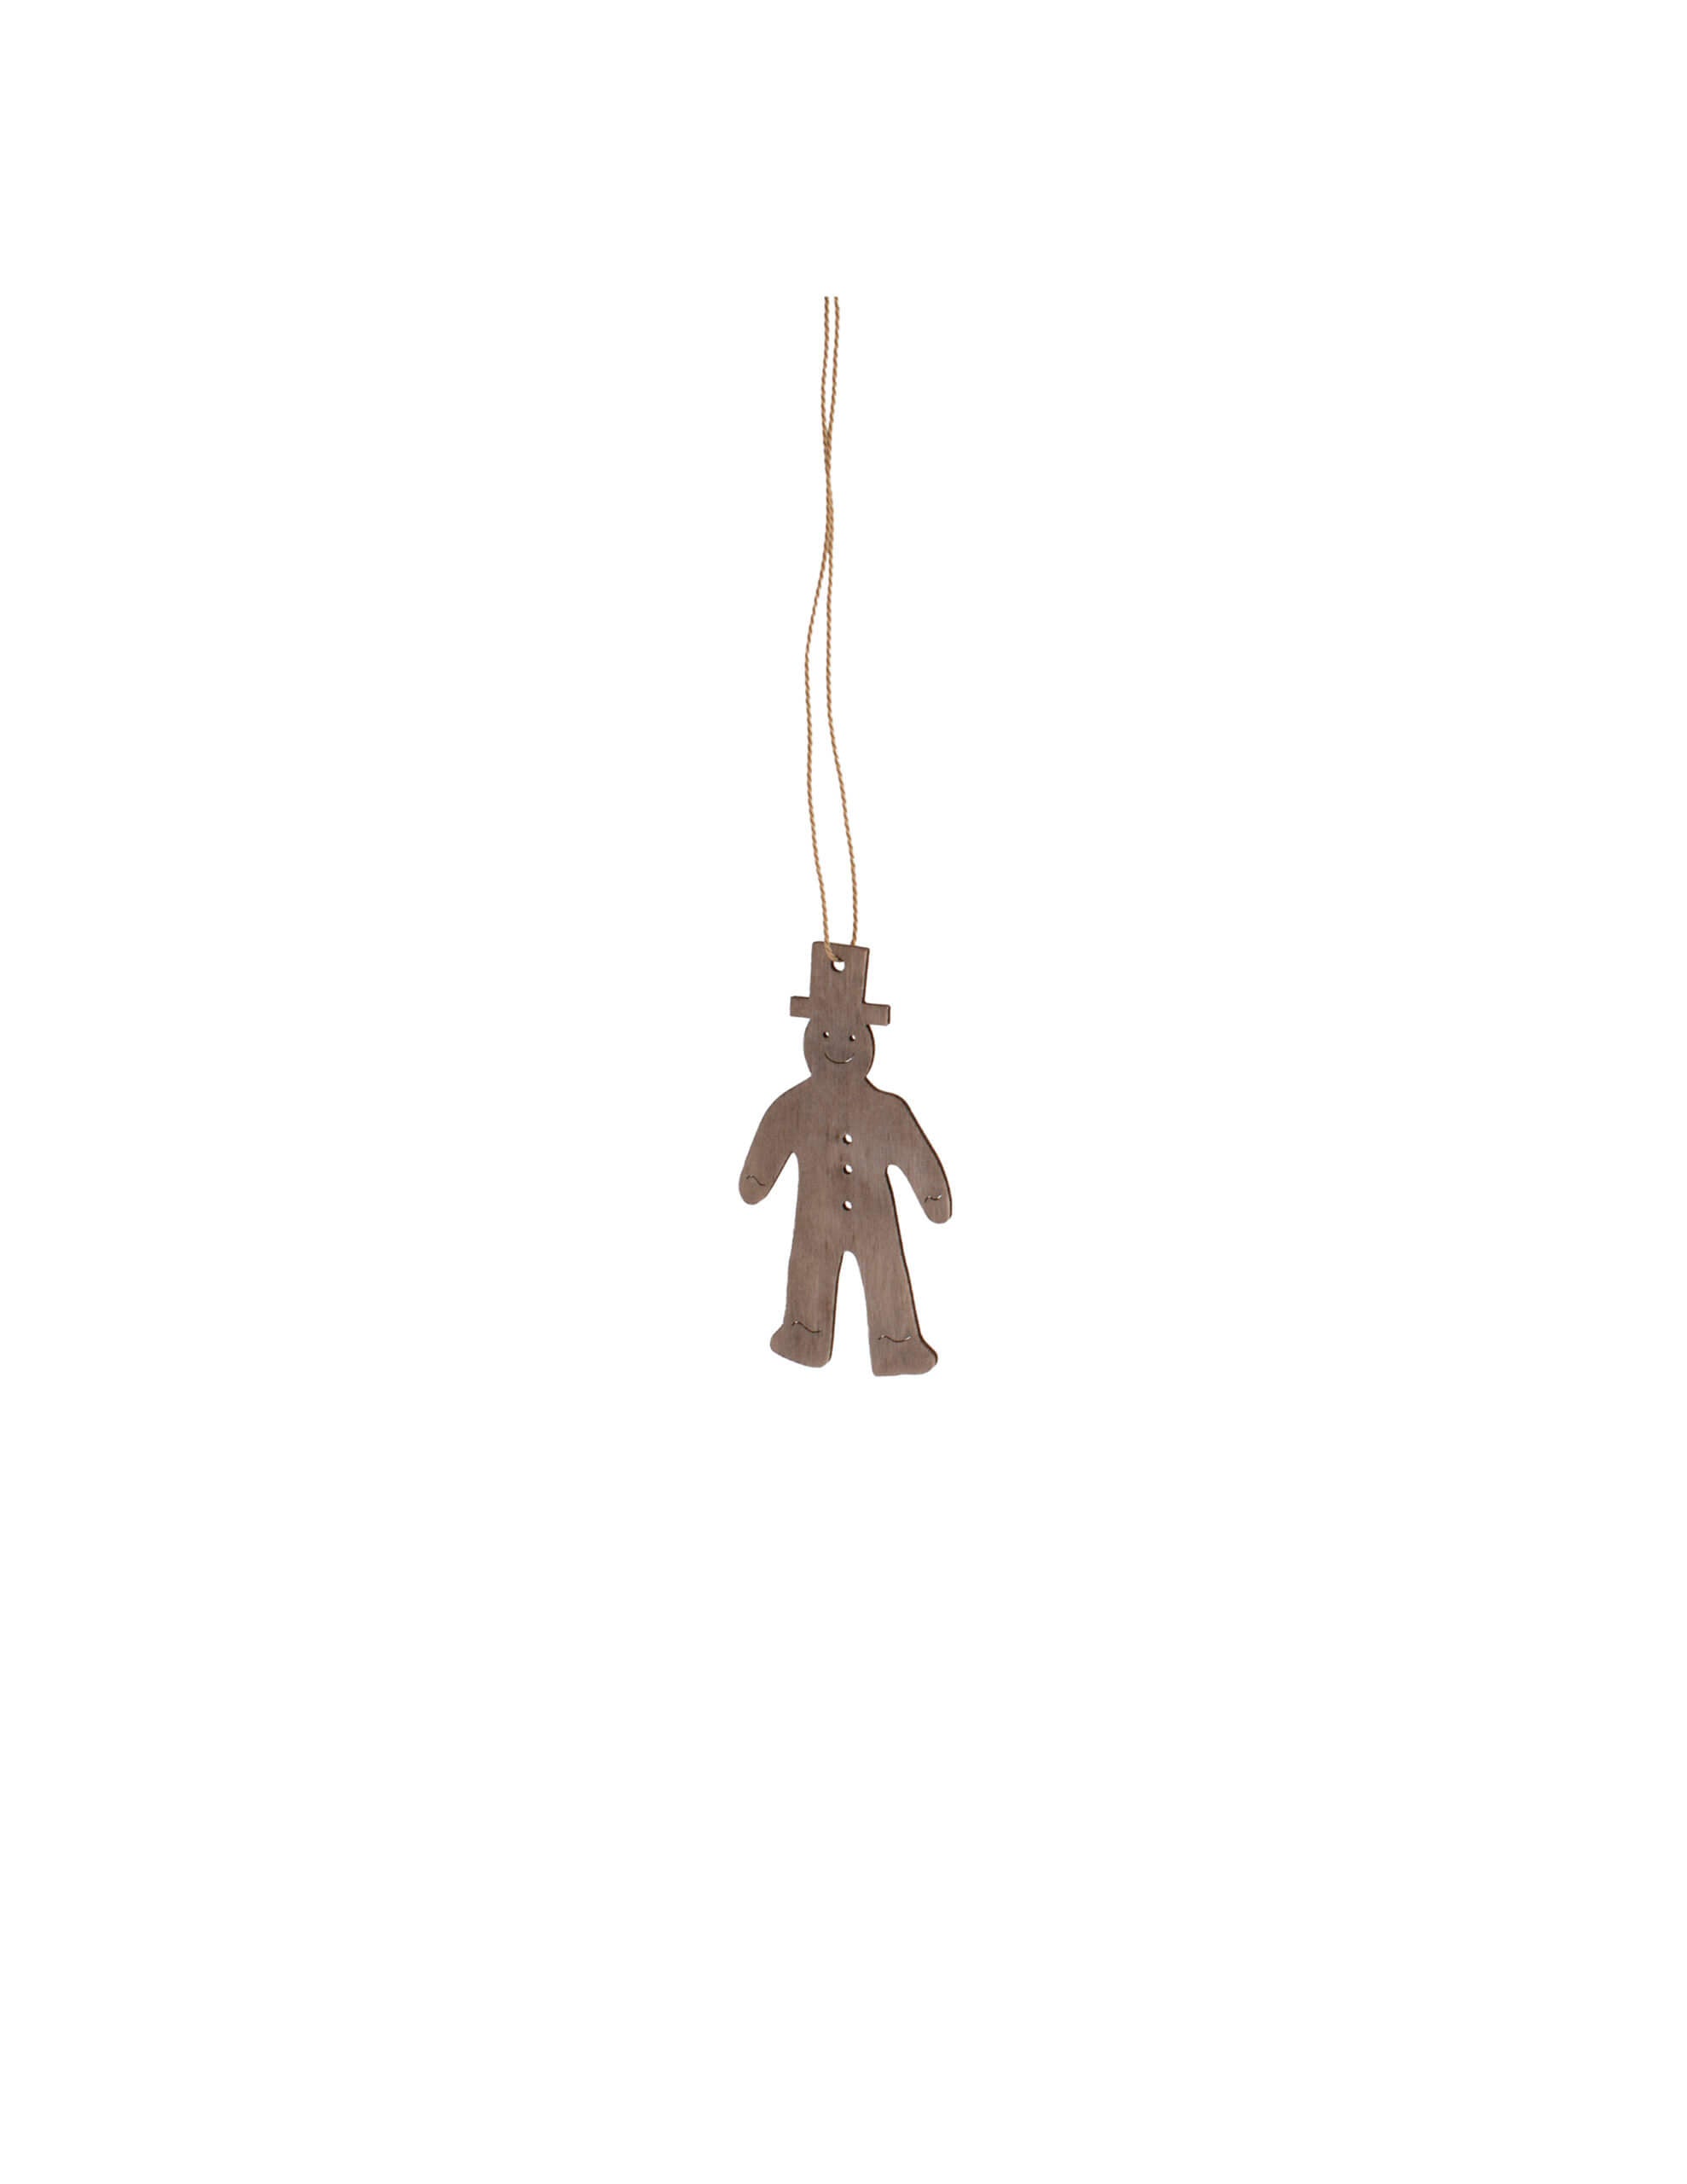 Alfred Gingerbread Decoration | Beige | by Storefactory - Lifestory